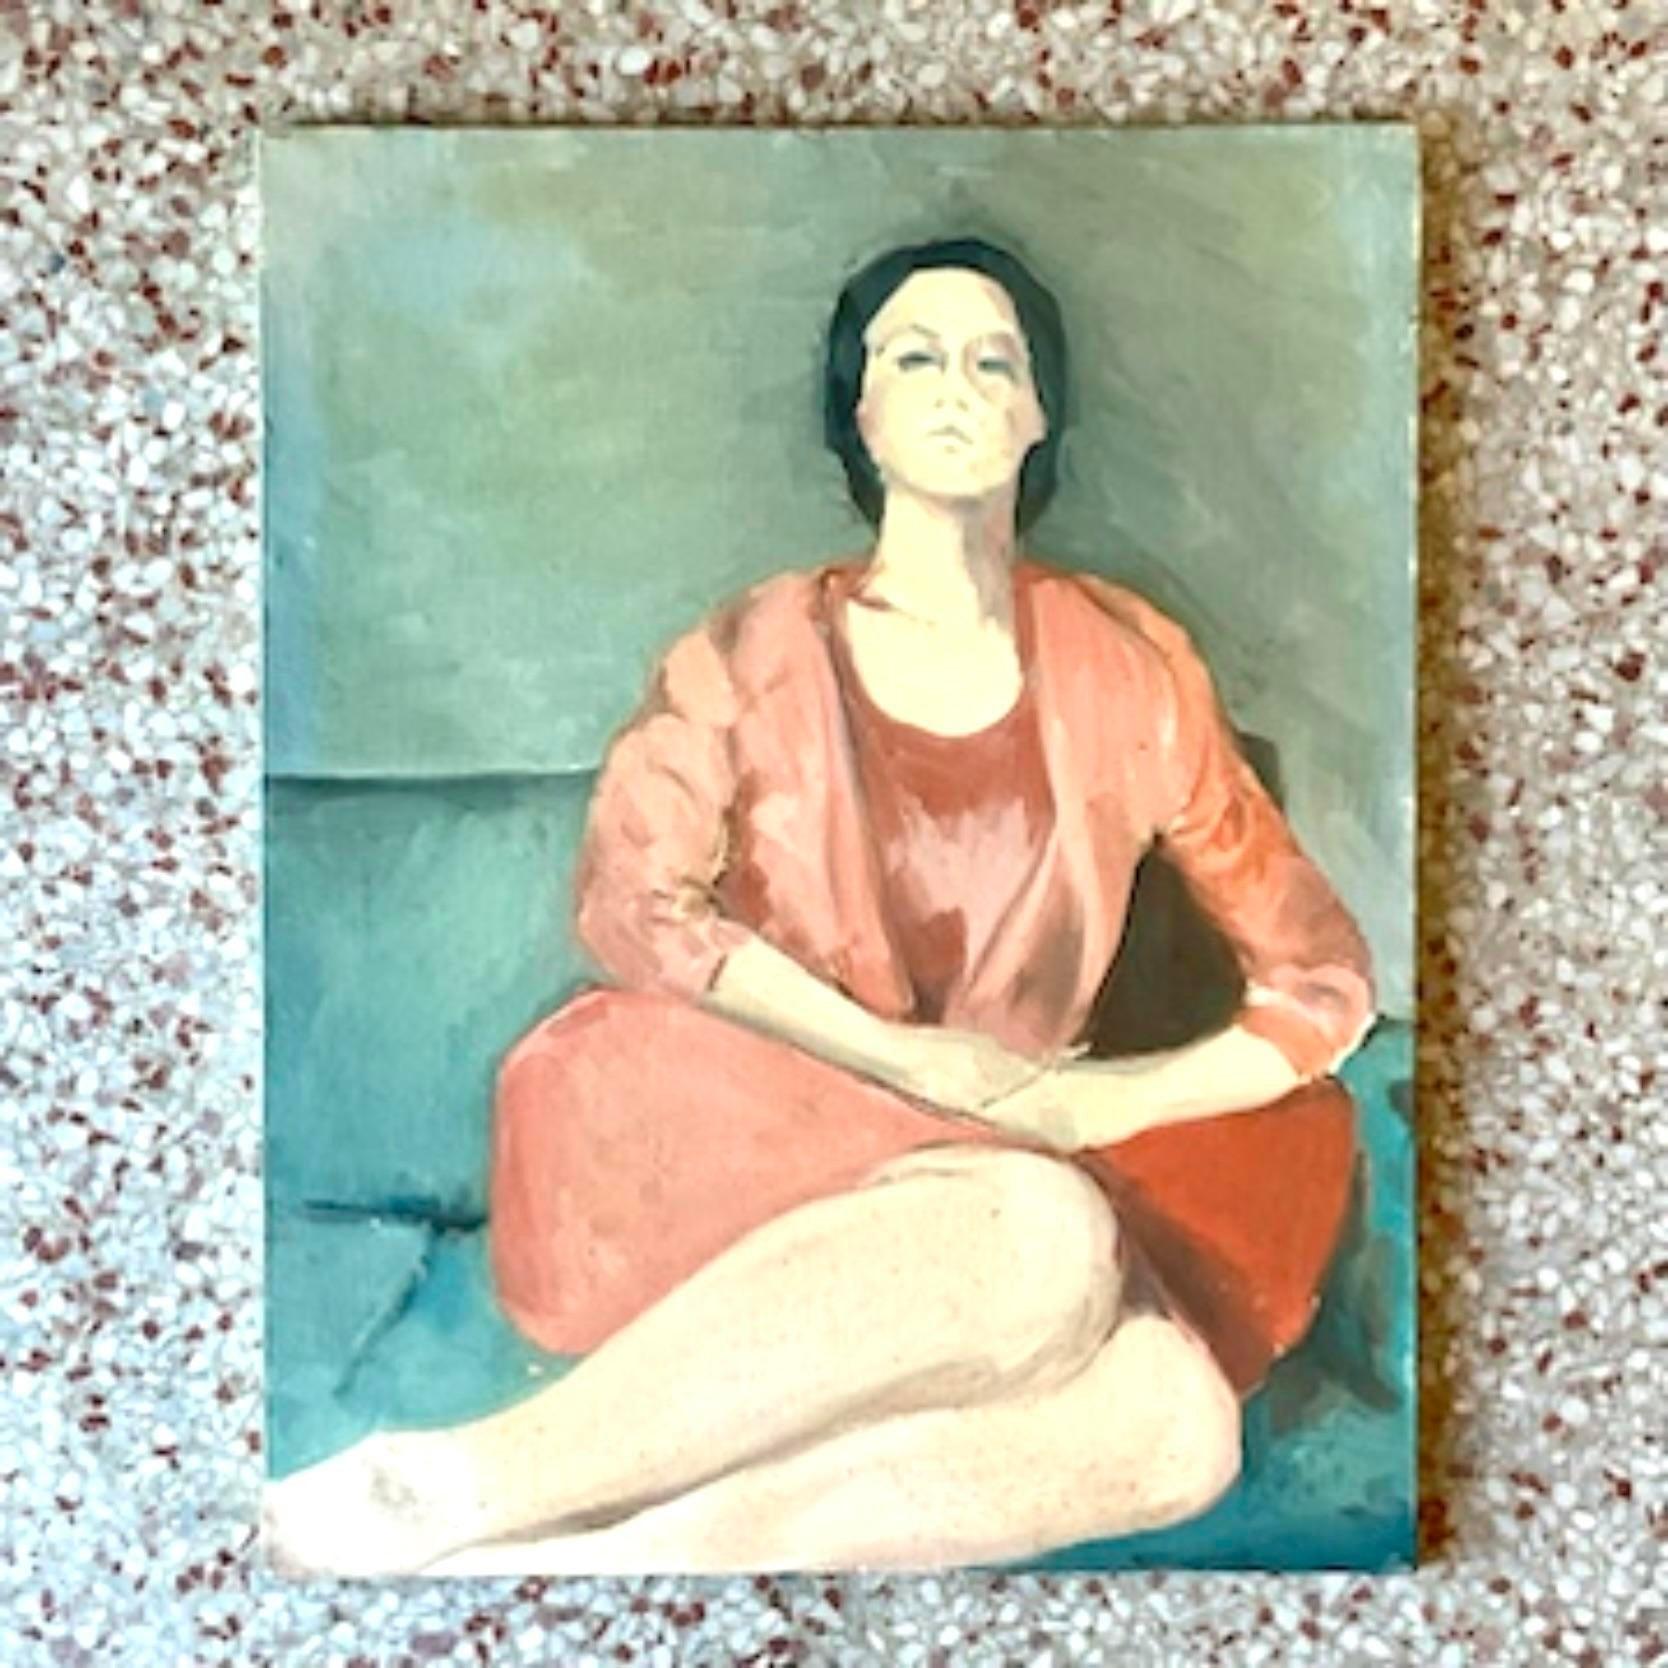 A fantastic vintage Boho 1960s original oil on canvas. A chic Abstract Figural composition of a woman in repose. A soft focus in muted colors. Really striking. Made in Italy. Signed and dated by the artist. Acquired from a Palm Beach estate.